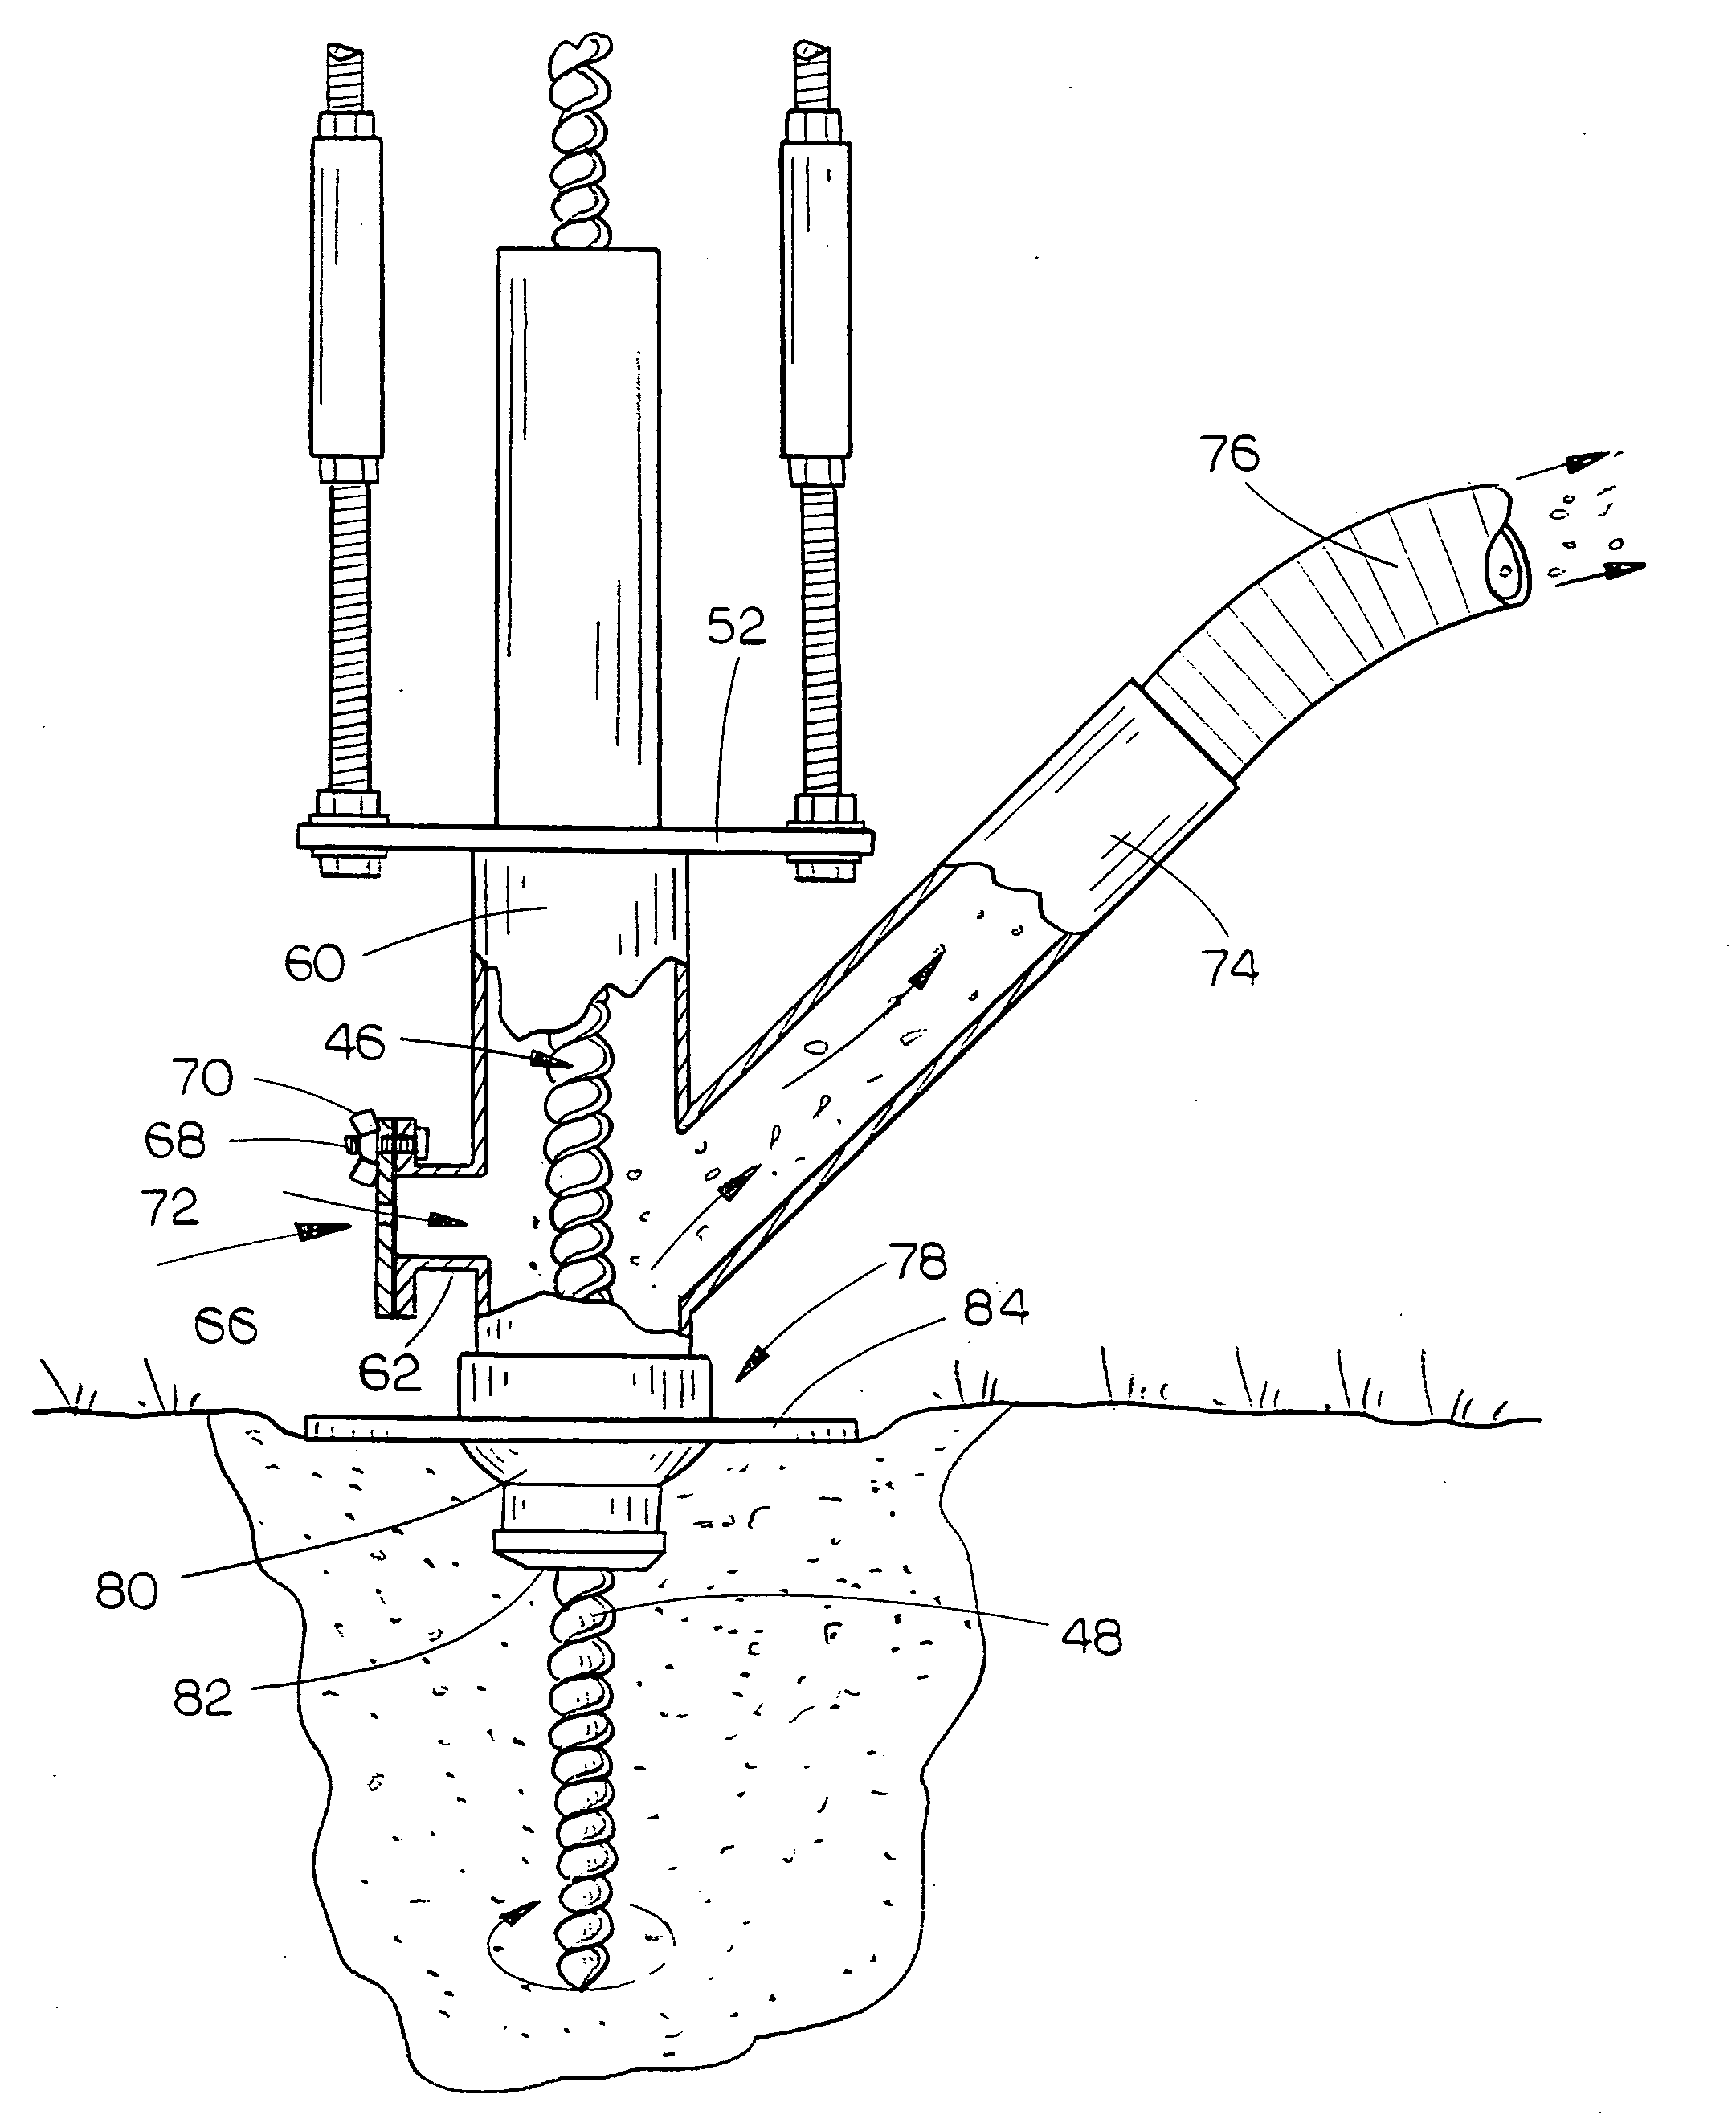 Mobile soil sampling device with vacuum collector